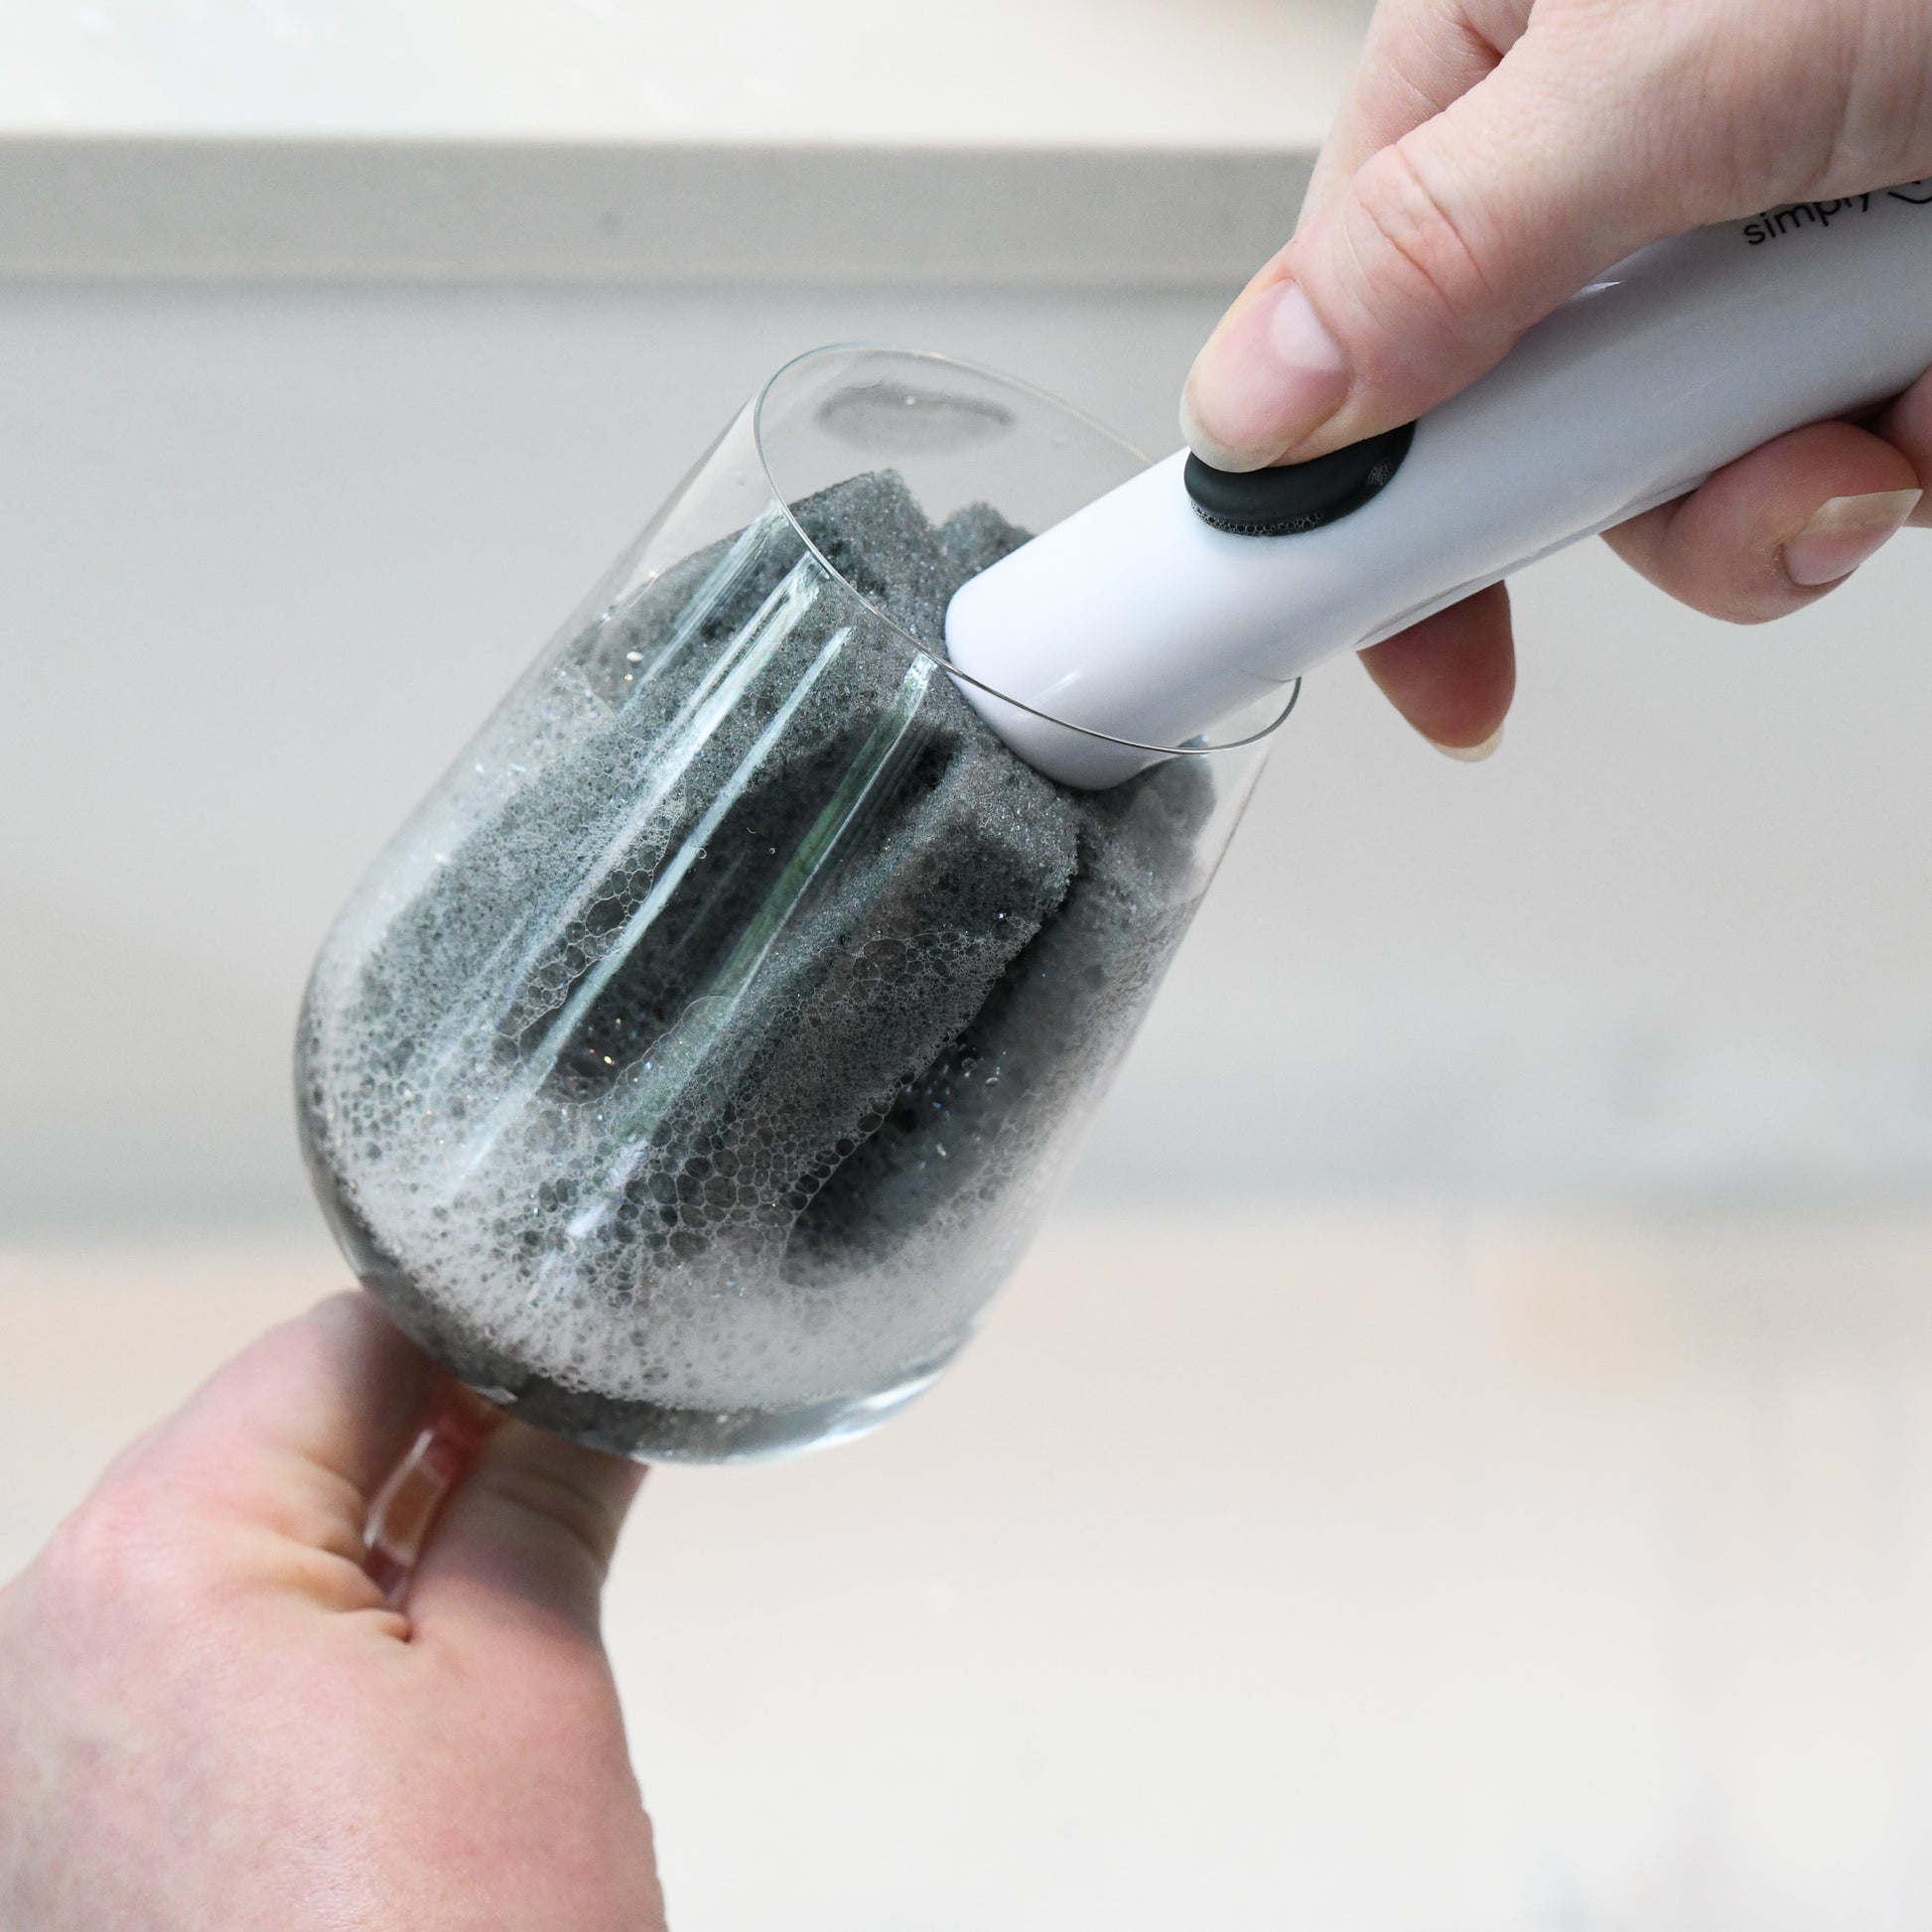 The WINE Brush dispenses soap to make this an all in one wine glass cleaning tool